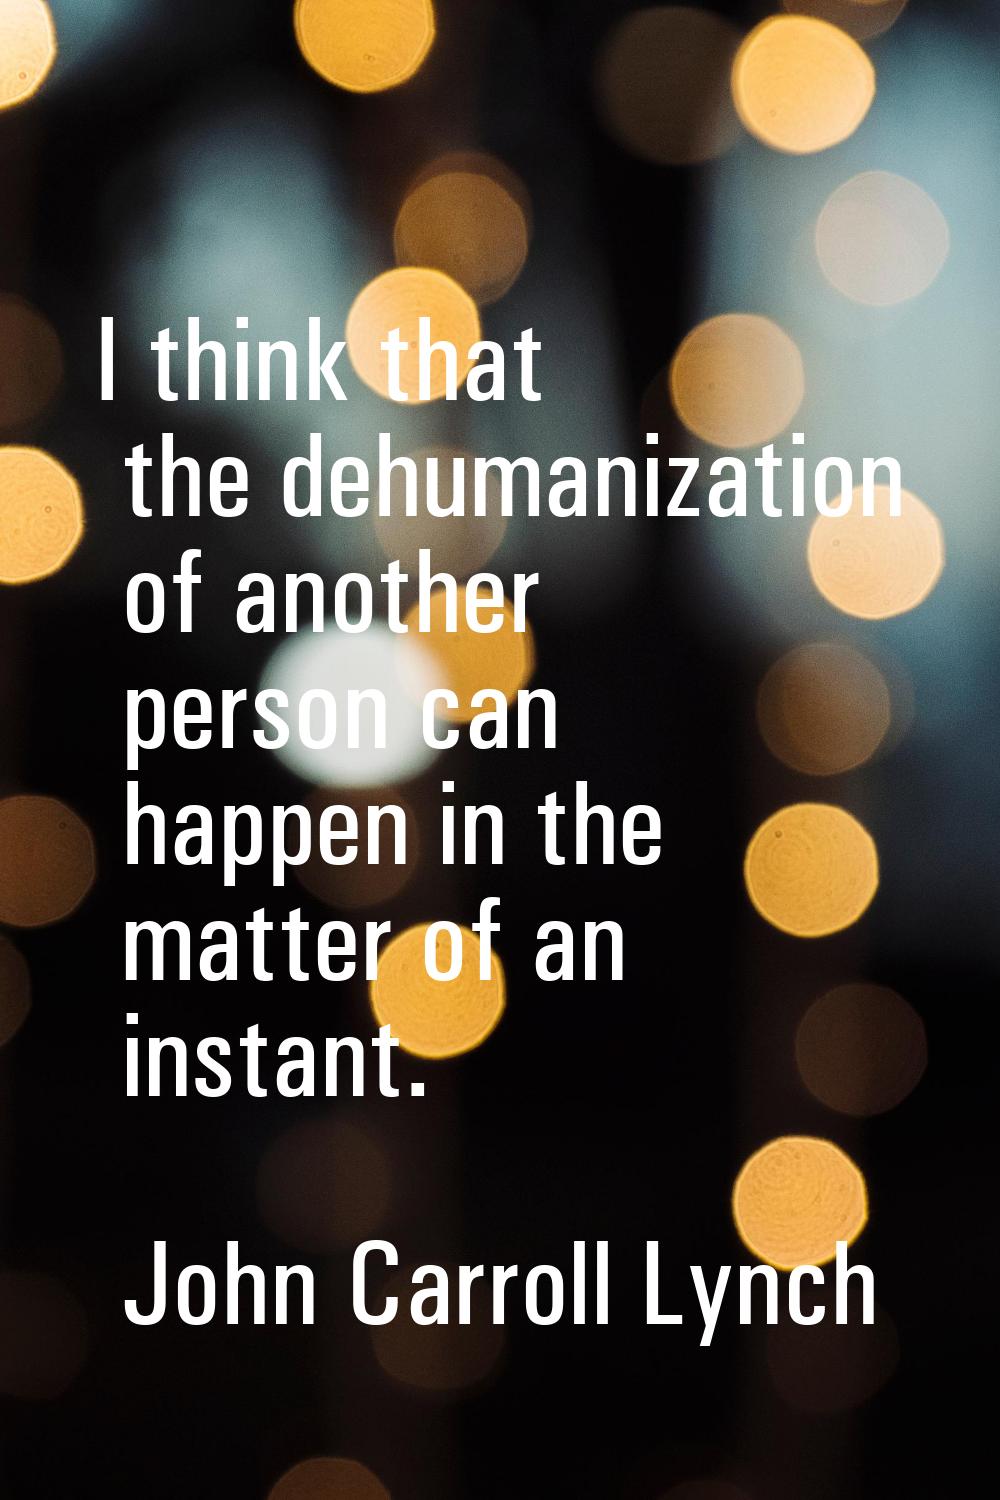 I think that the dehumanization of another person can happen in the matter of an instant.